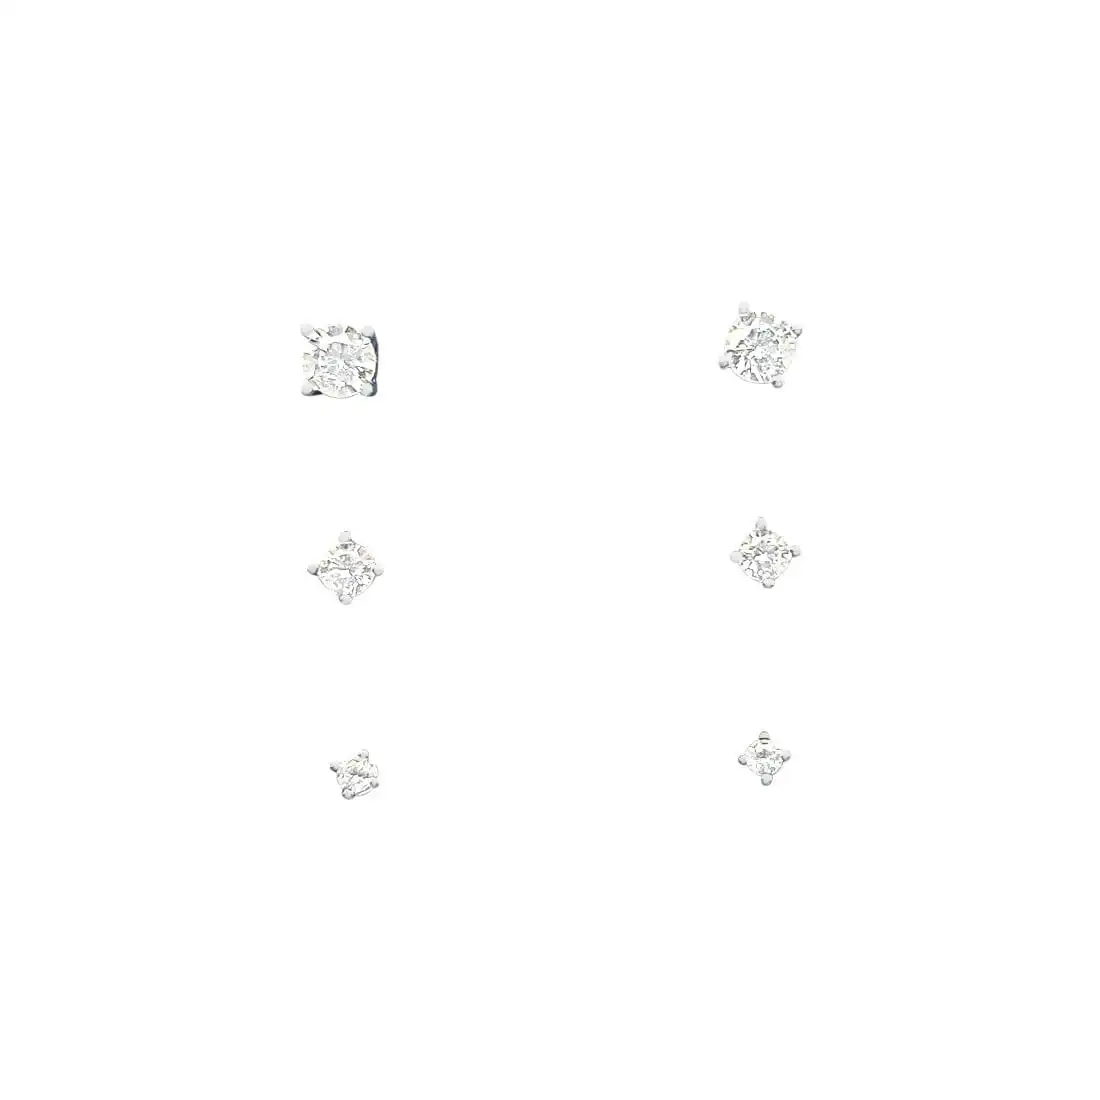 Children's Sterling Silver 3pc Stud Earring Set with Cubic Zirconia